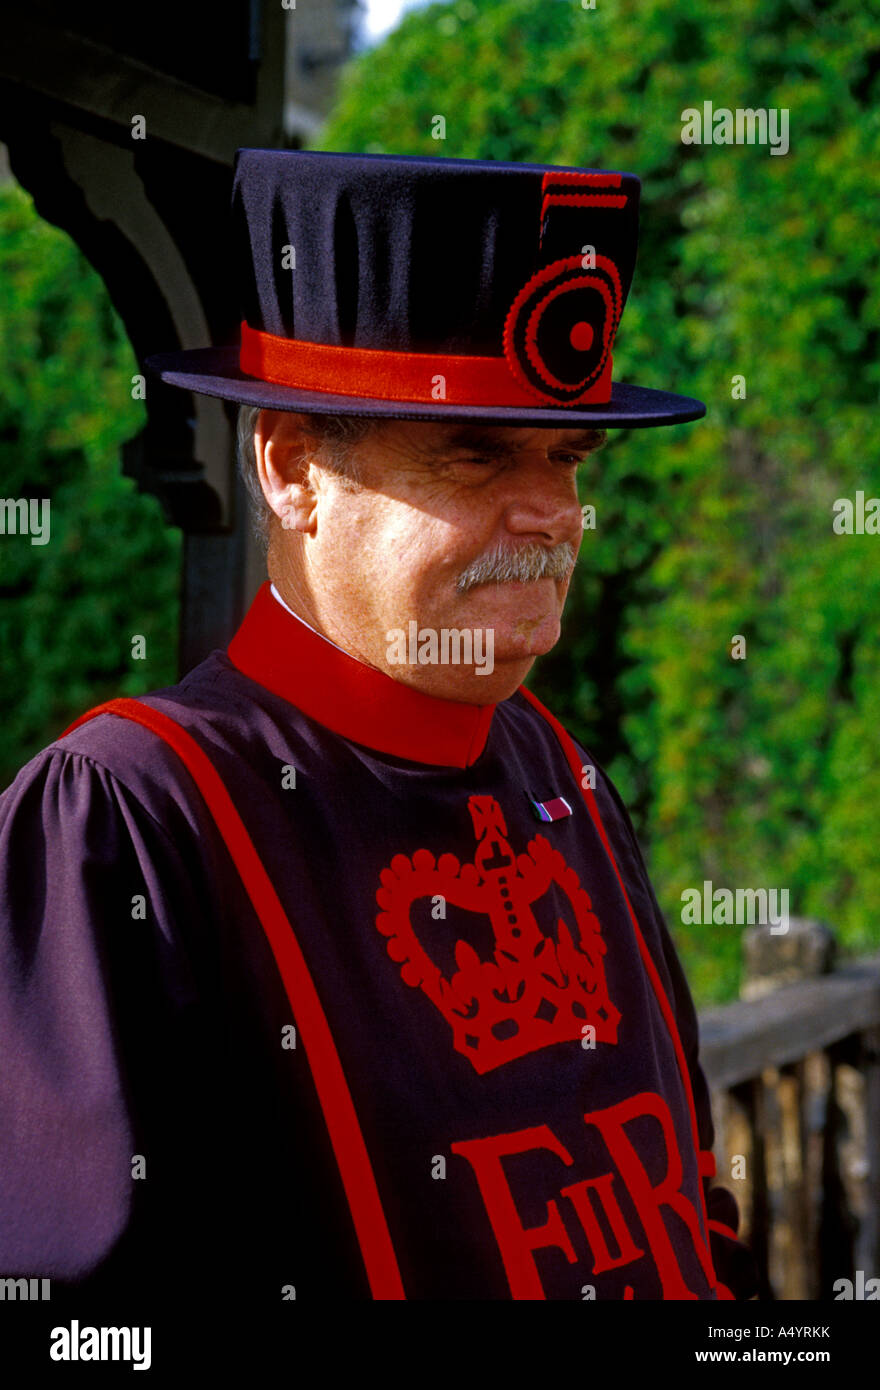 1, one, Yeoman Warder, Beefeater, Queen's Royal Guard, Tower of London, capital city, city, London, England, Great Britain, United Kingdom, Europe Stock Photo